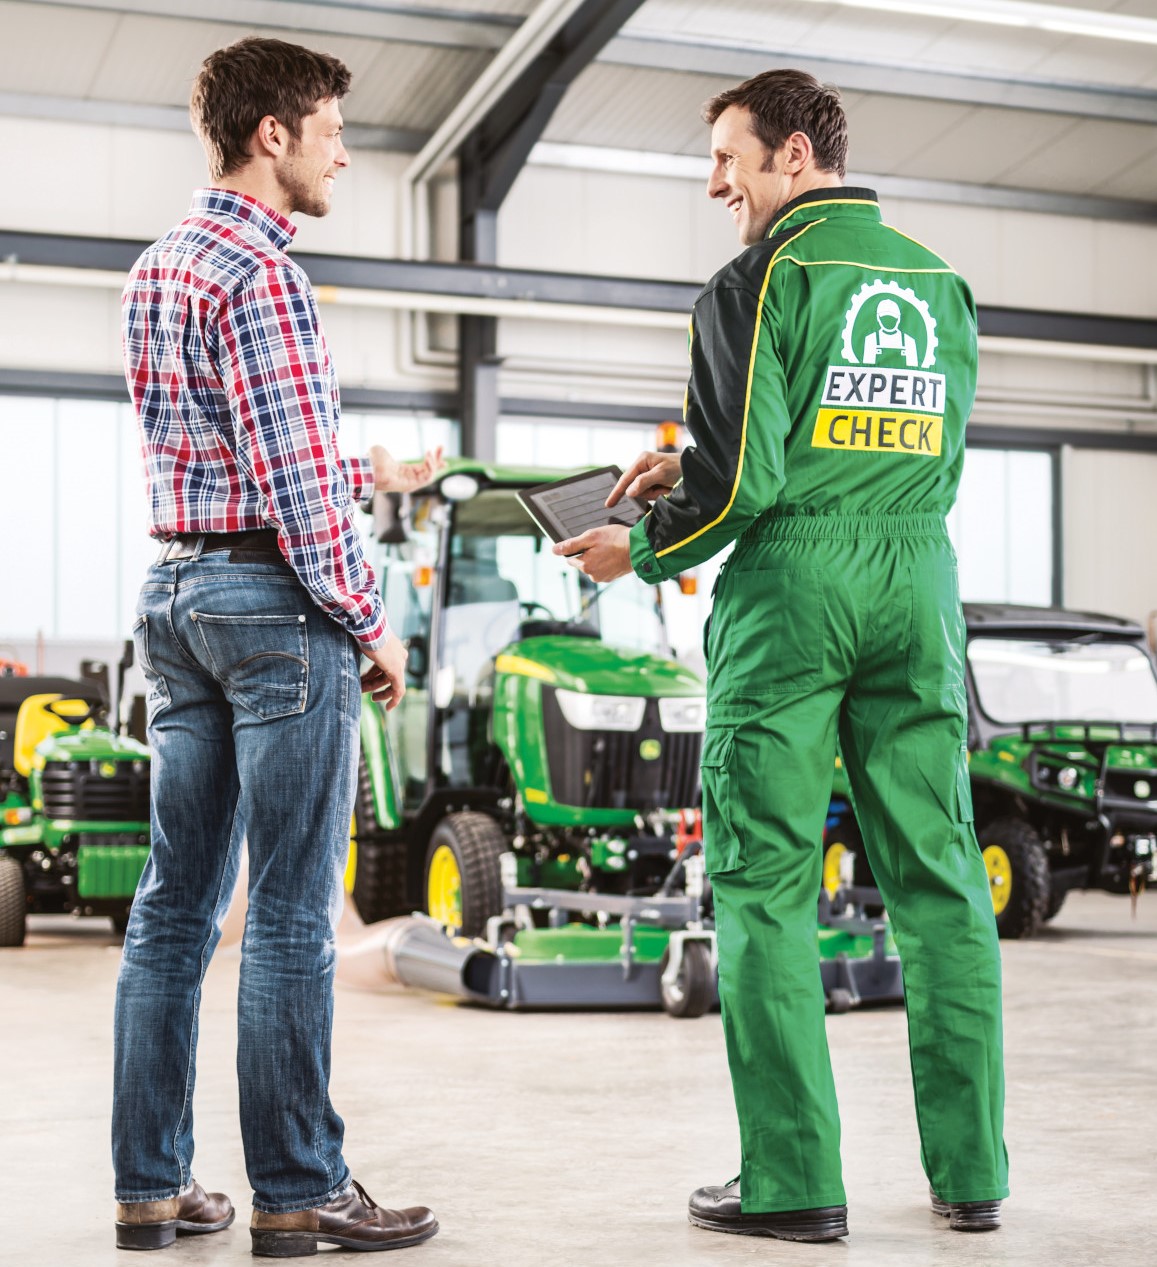 Ground-Care machinery service by the John Deere experts